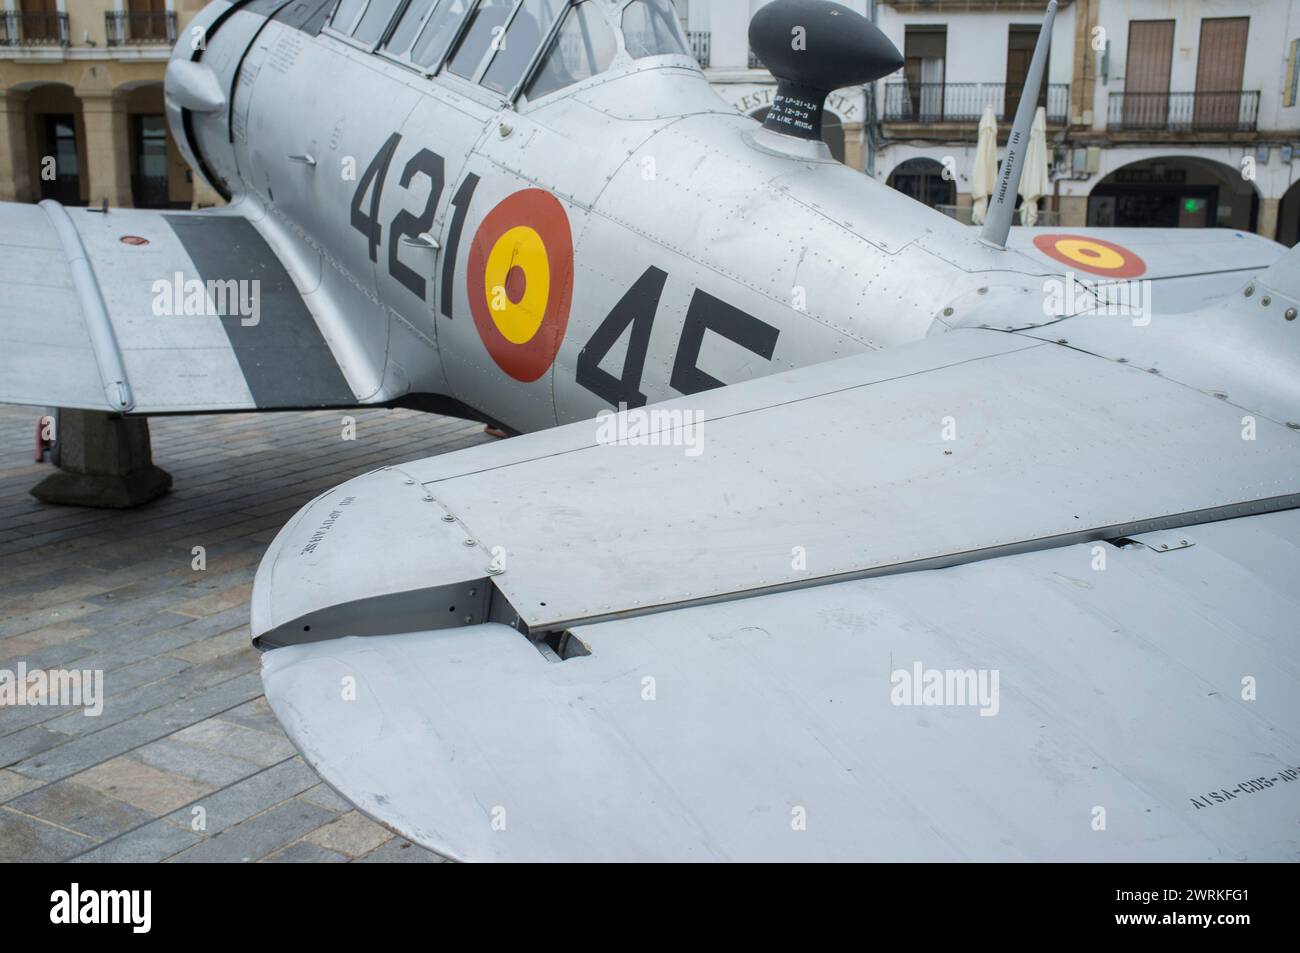 Caceres, Spain - May 27th, 2021: North American Aviation T-6 Texan. Spanish military aviation exhibition. Caceres main square, Spain Stock Photo